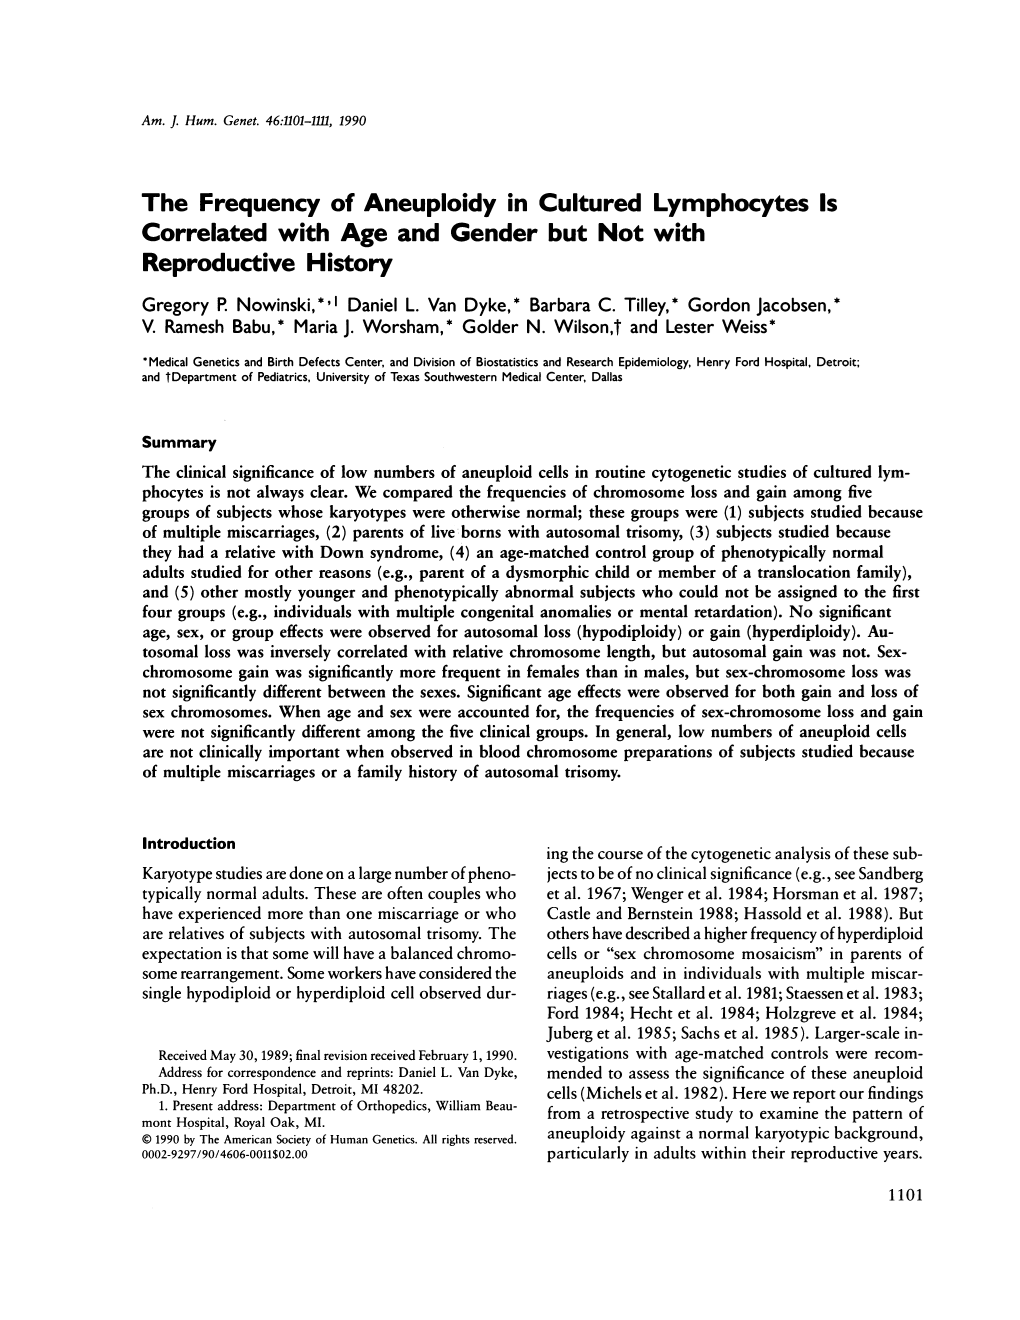 The Frequency of Aneuploidy in Cultured Lymphocytes Is Correlated with Age and Gender but Not with Reproductive History